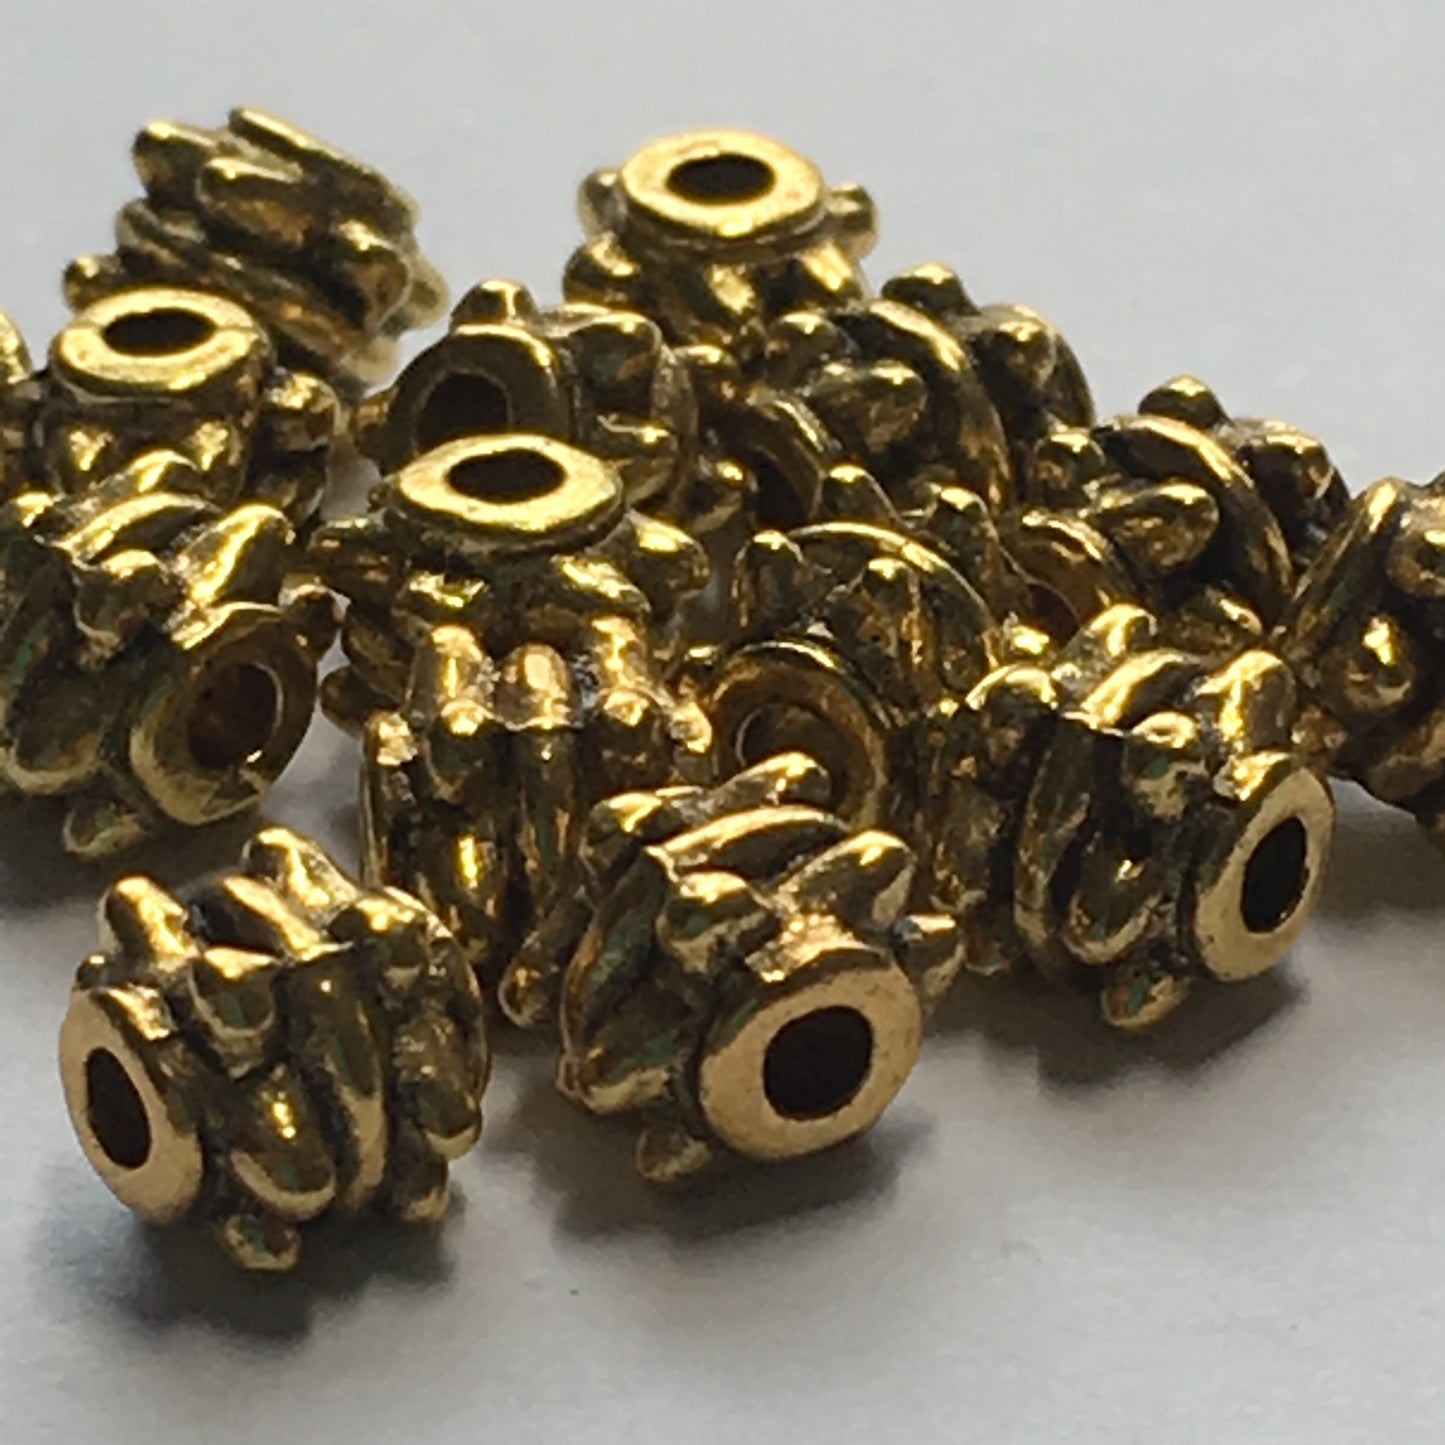 Antique Gold Bali Style Barrel Beads, 5 x 5 mm - 15 Beads